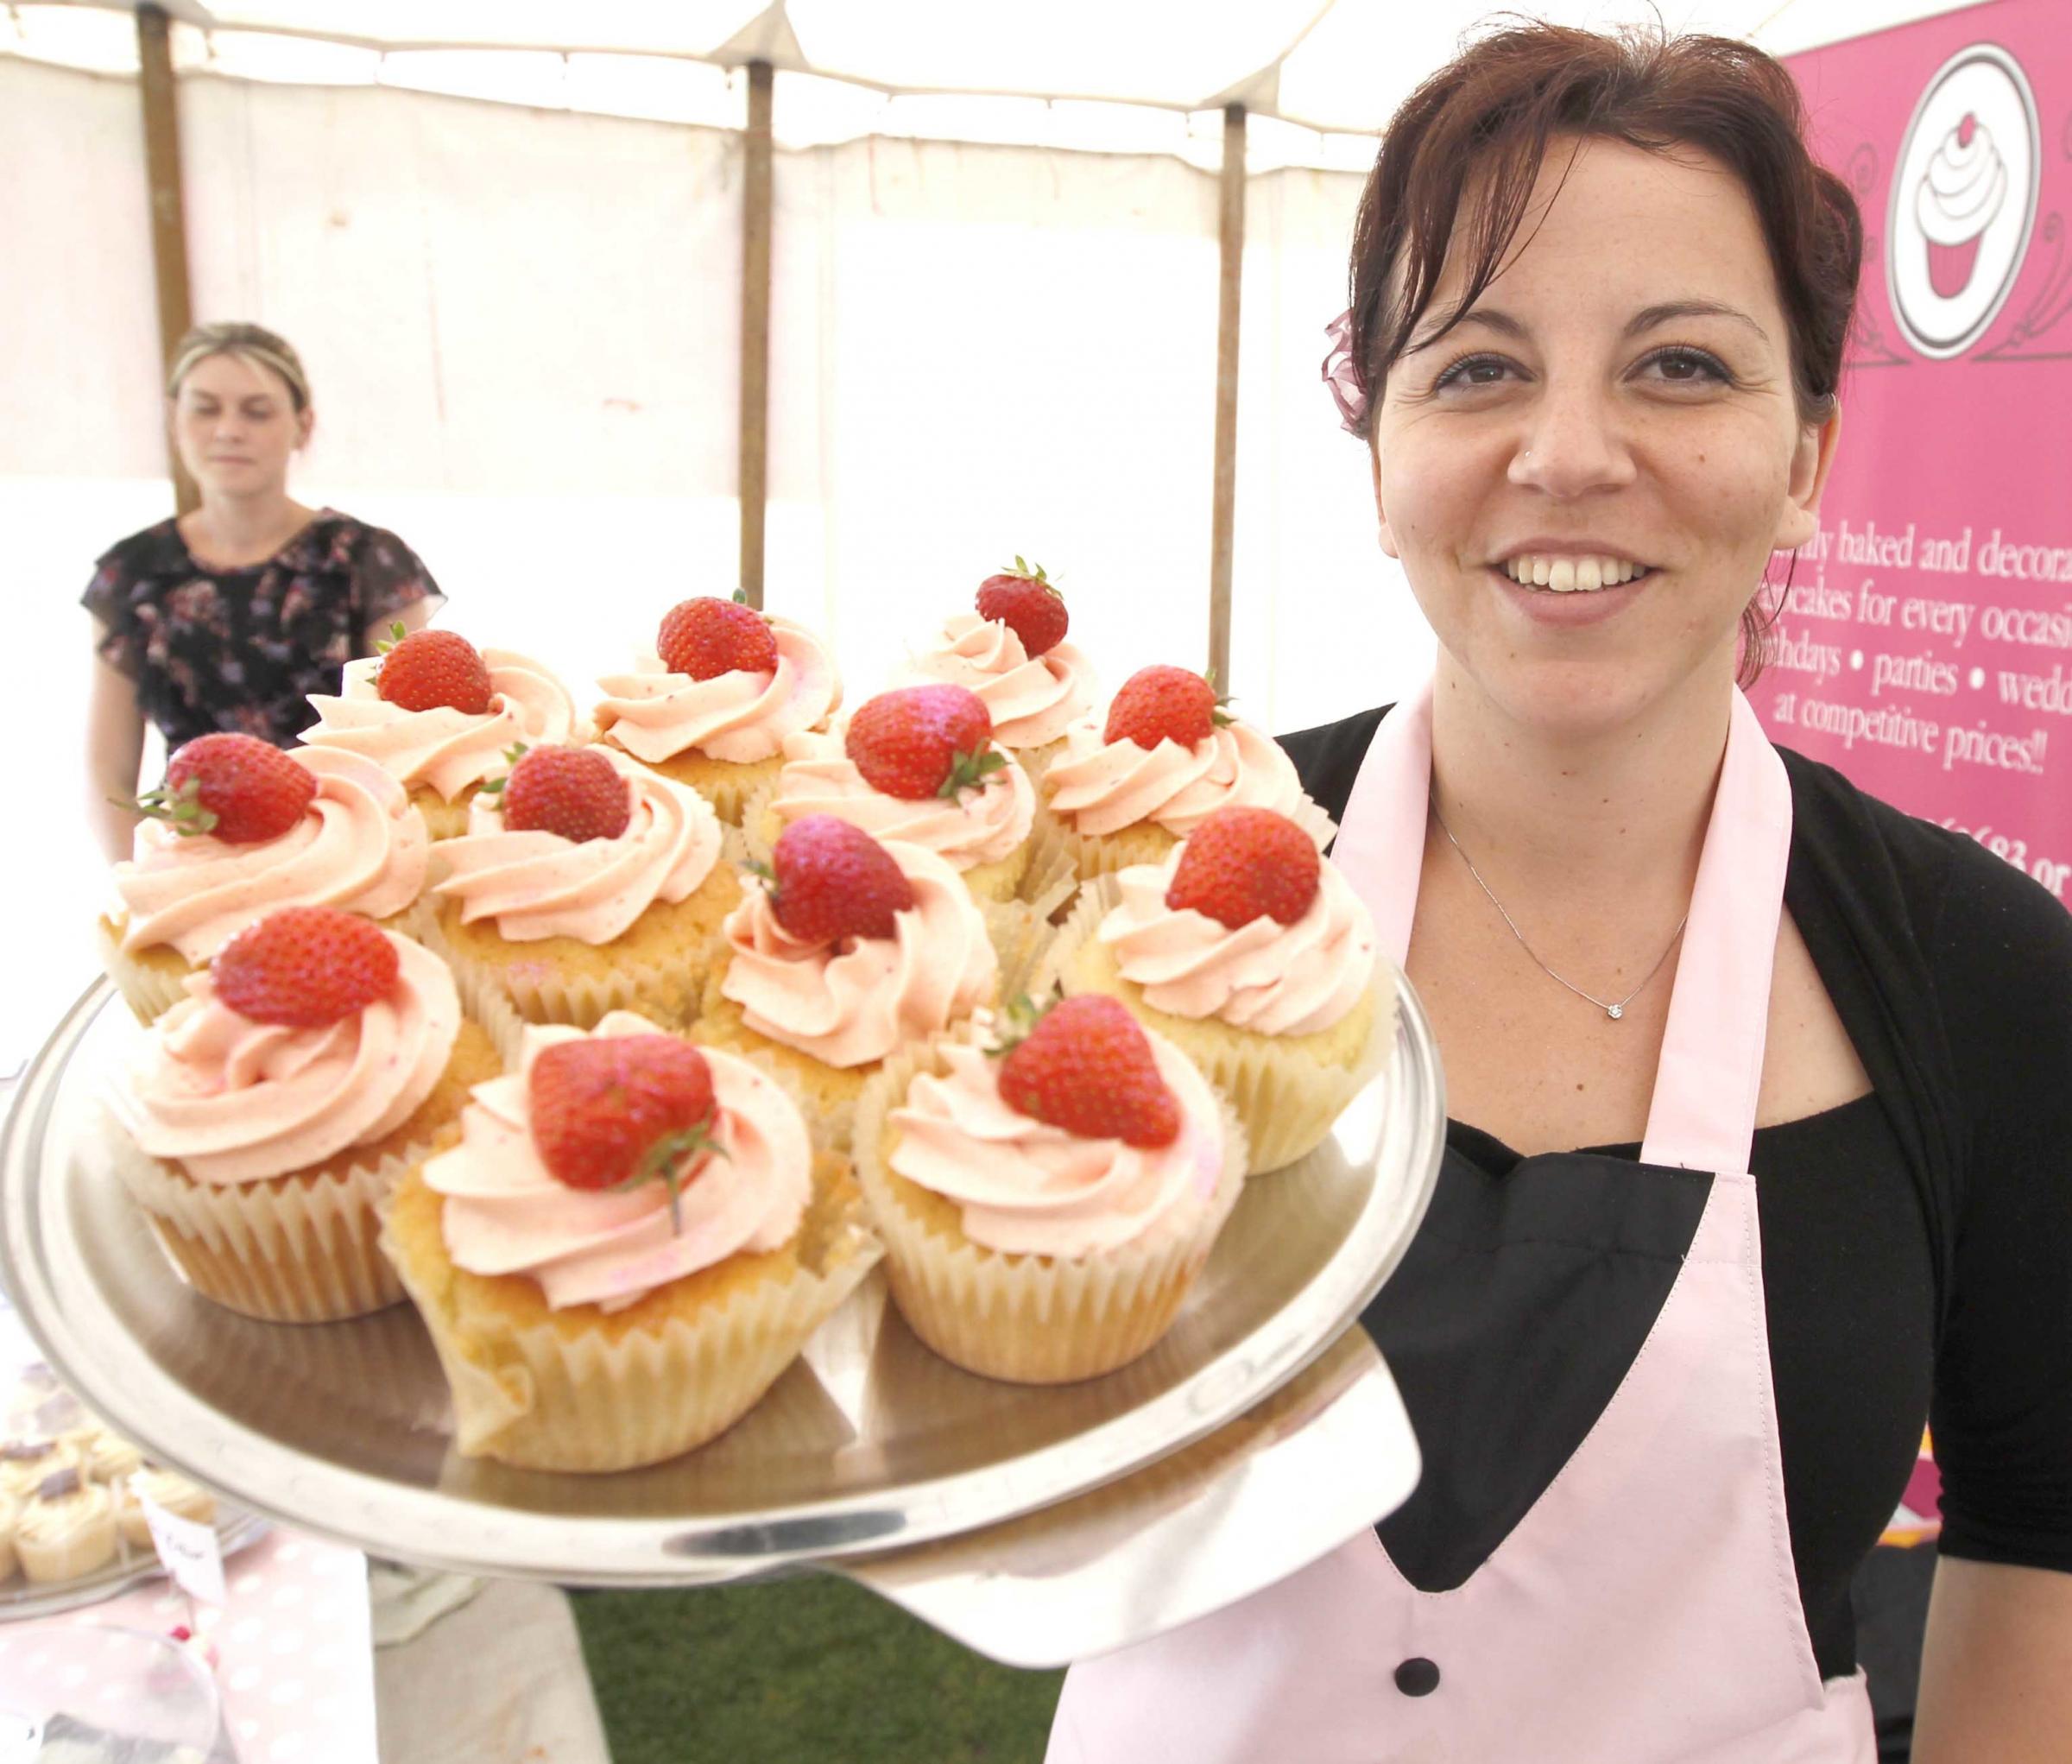 Give and cake - Michaela Doggett hands out some of her beautiful cup cakes